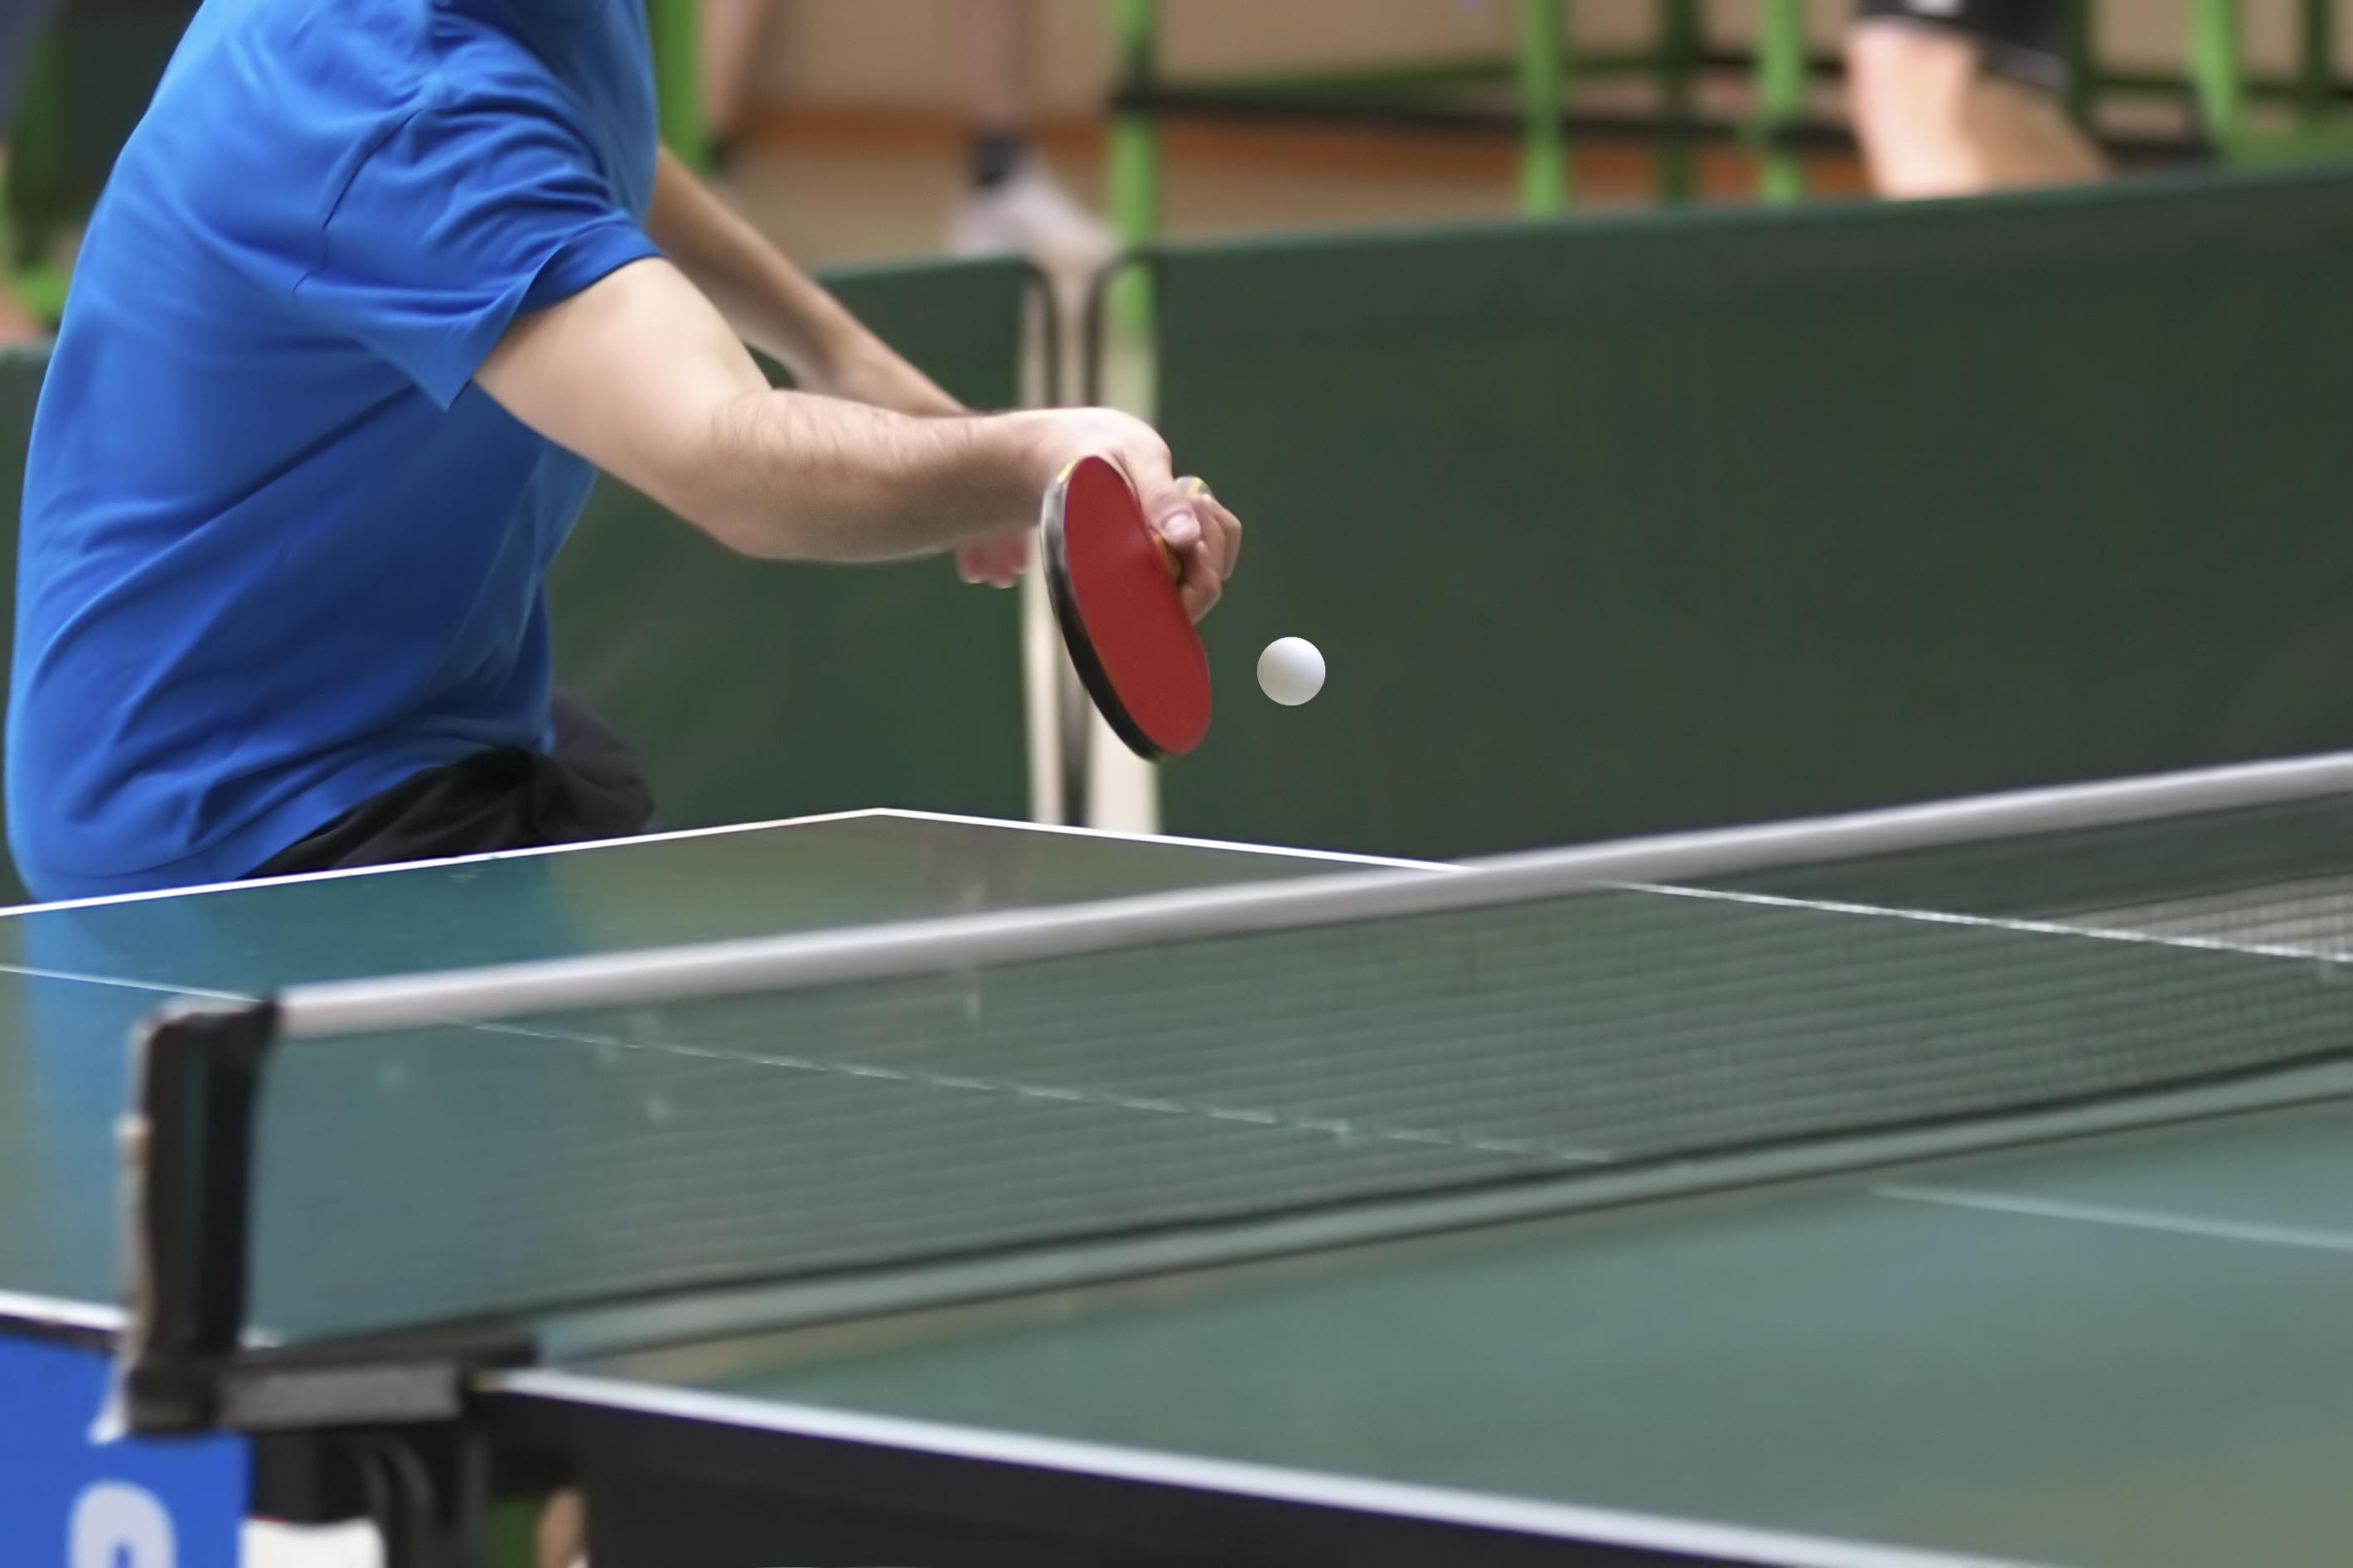 What To Avoid in Playing Ping Pong